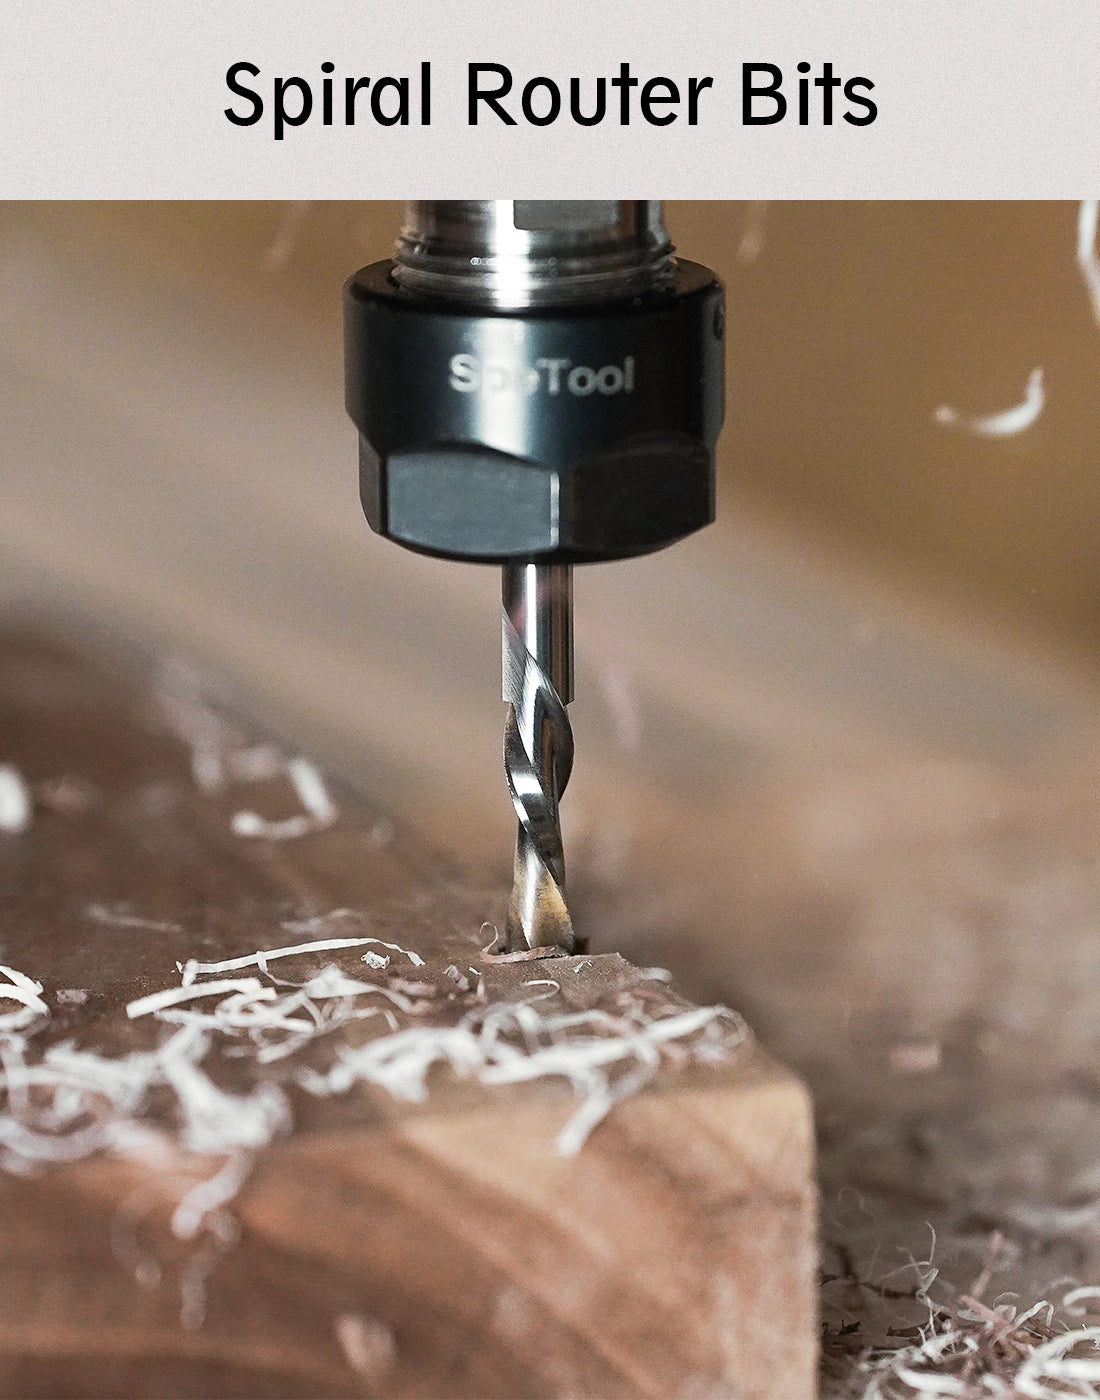 SpeTool Spiral router bits